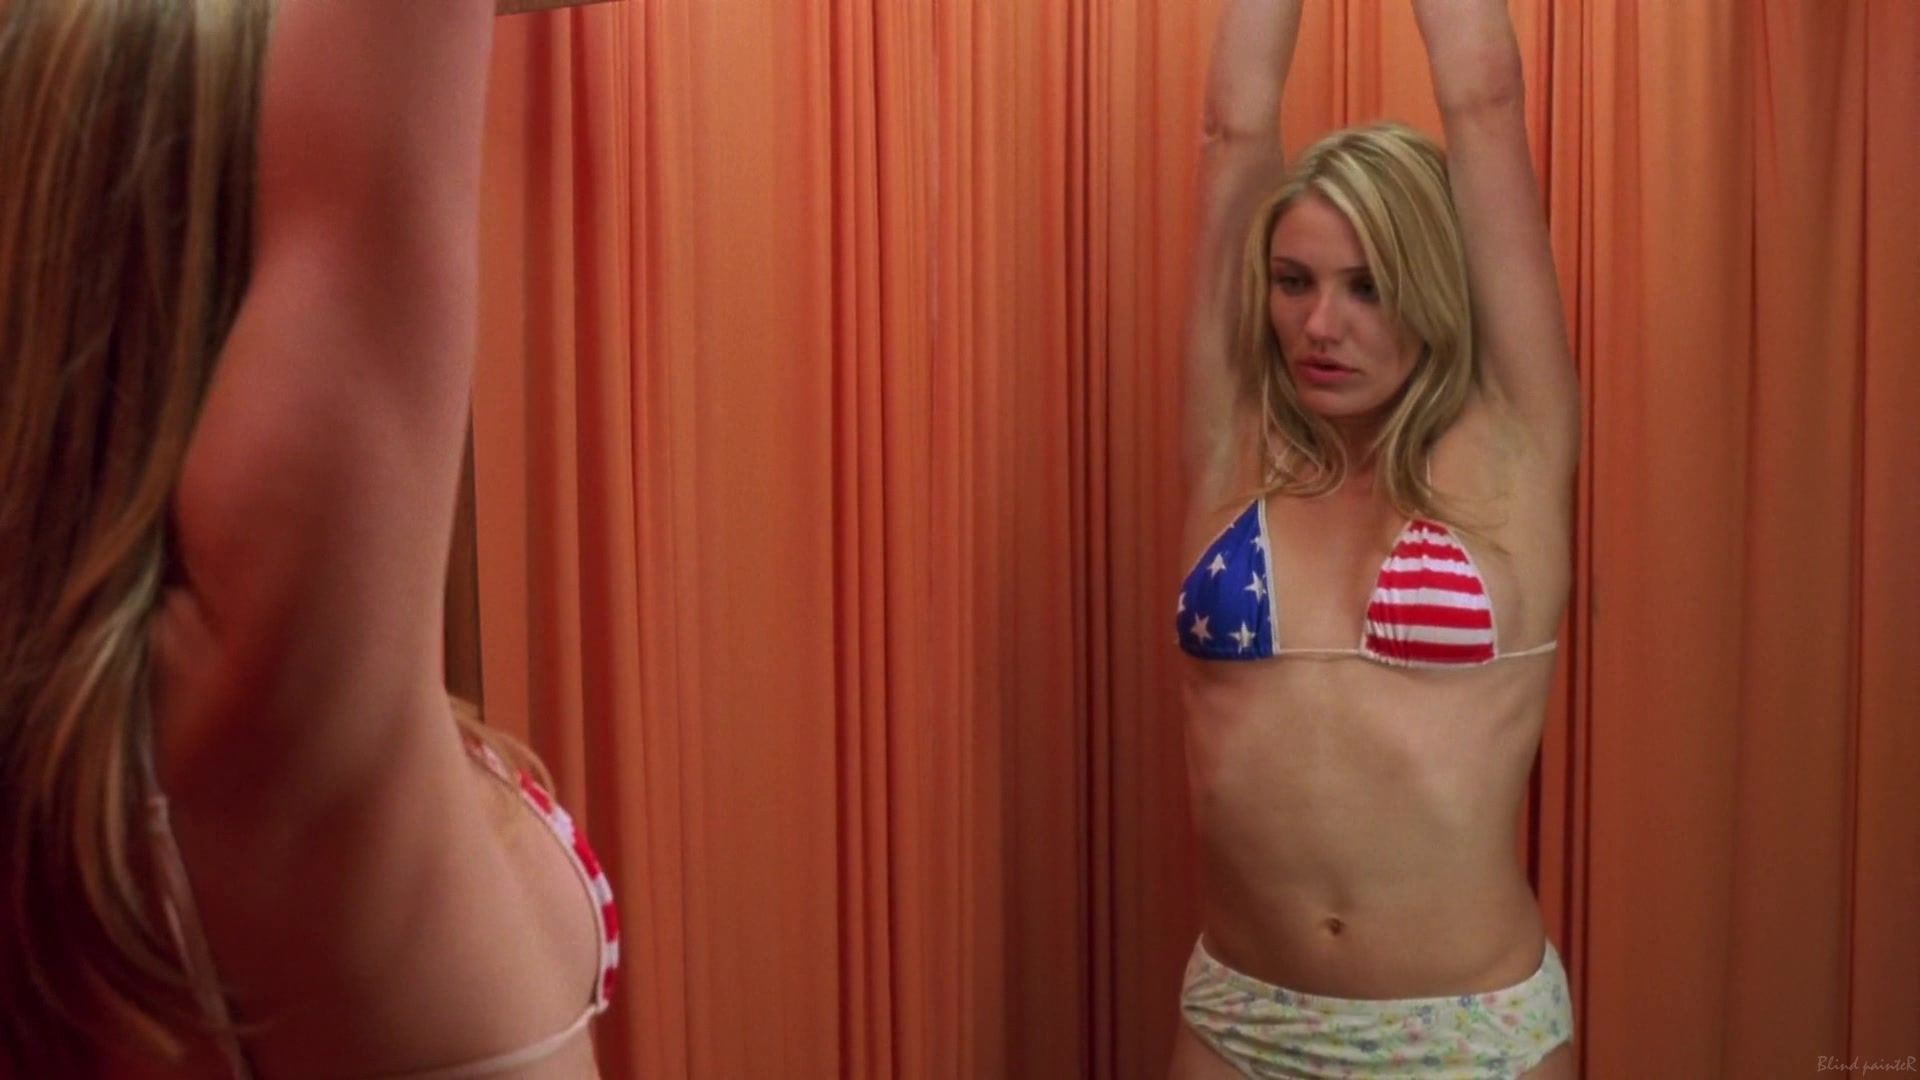 TubeStack Topless actress Cameron Diaz & Christina Applegate nude - The Sweetest Thing (2002) Huge